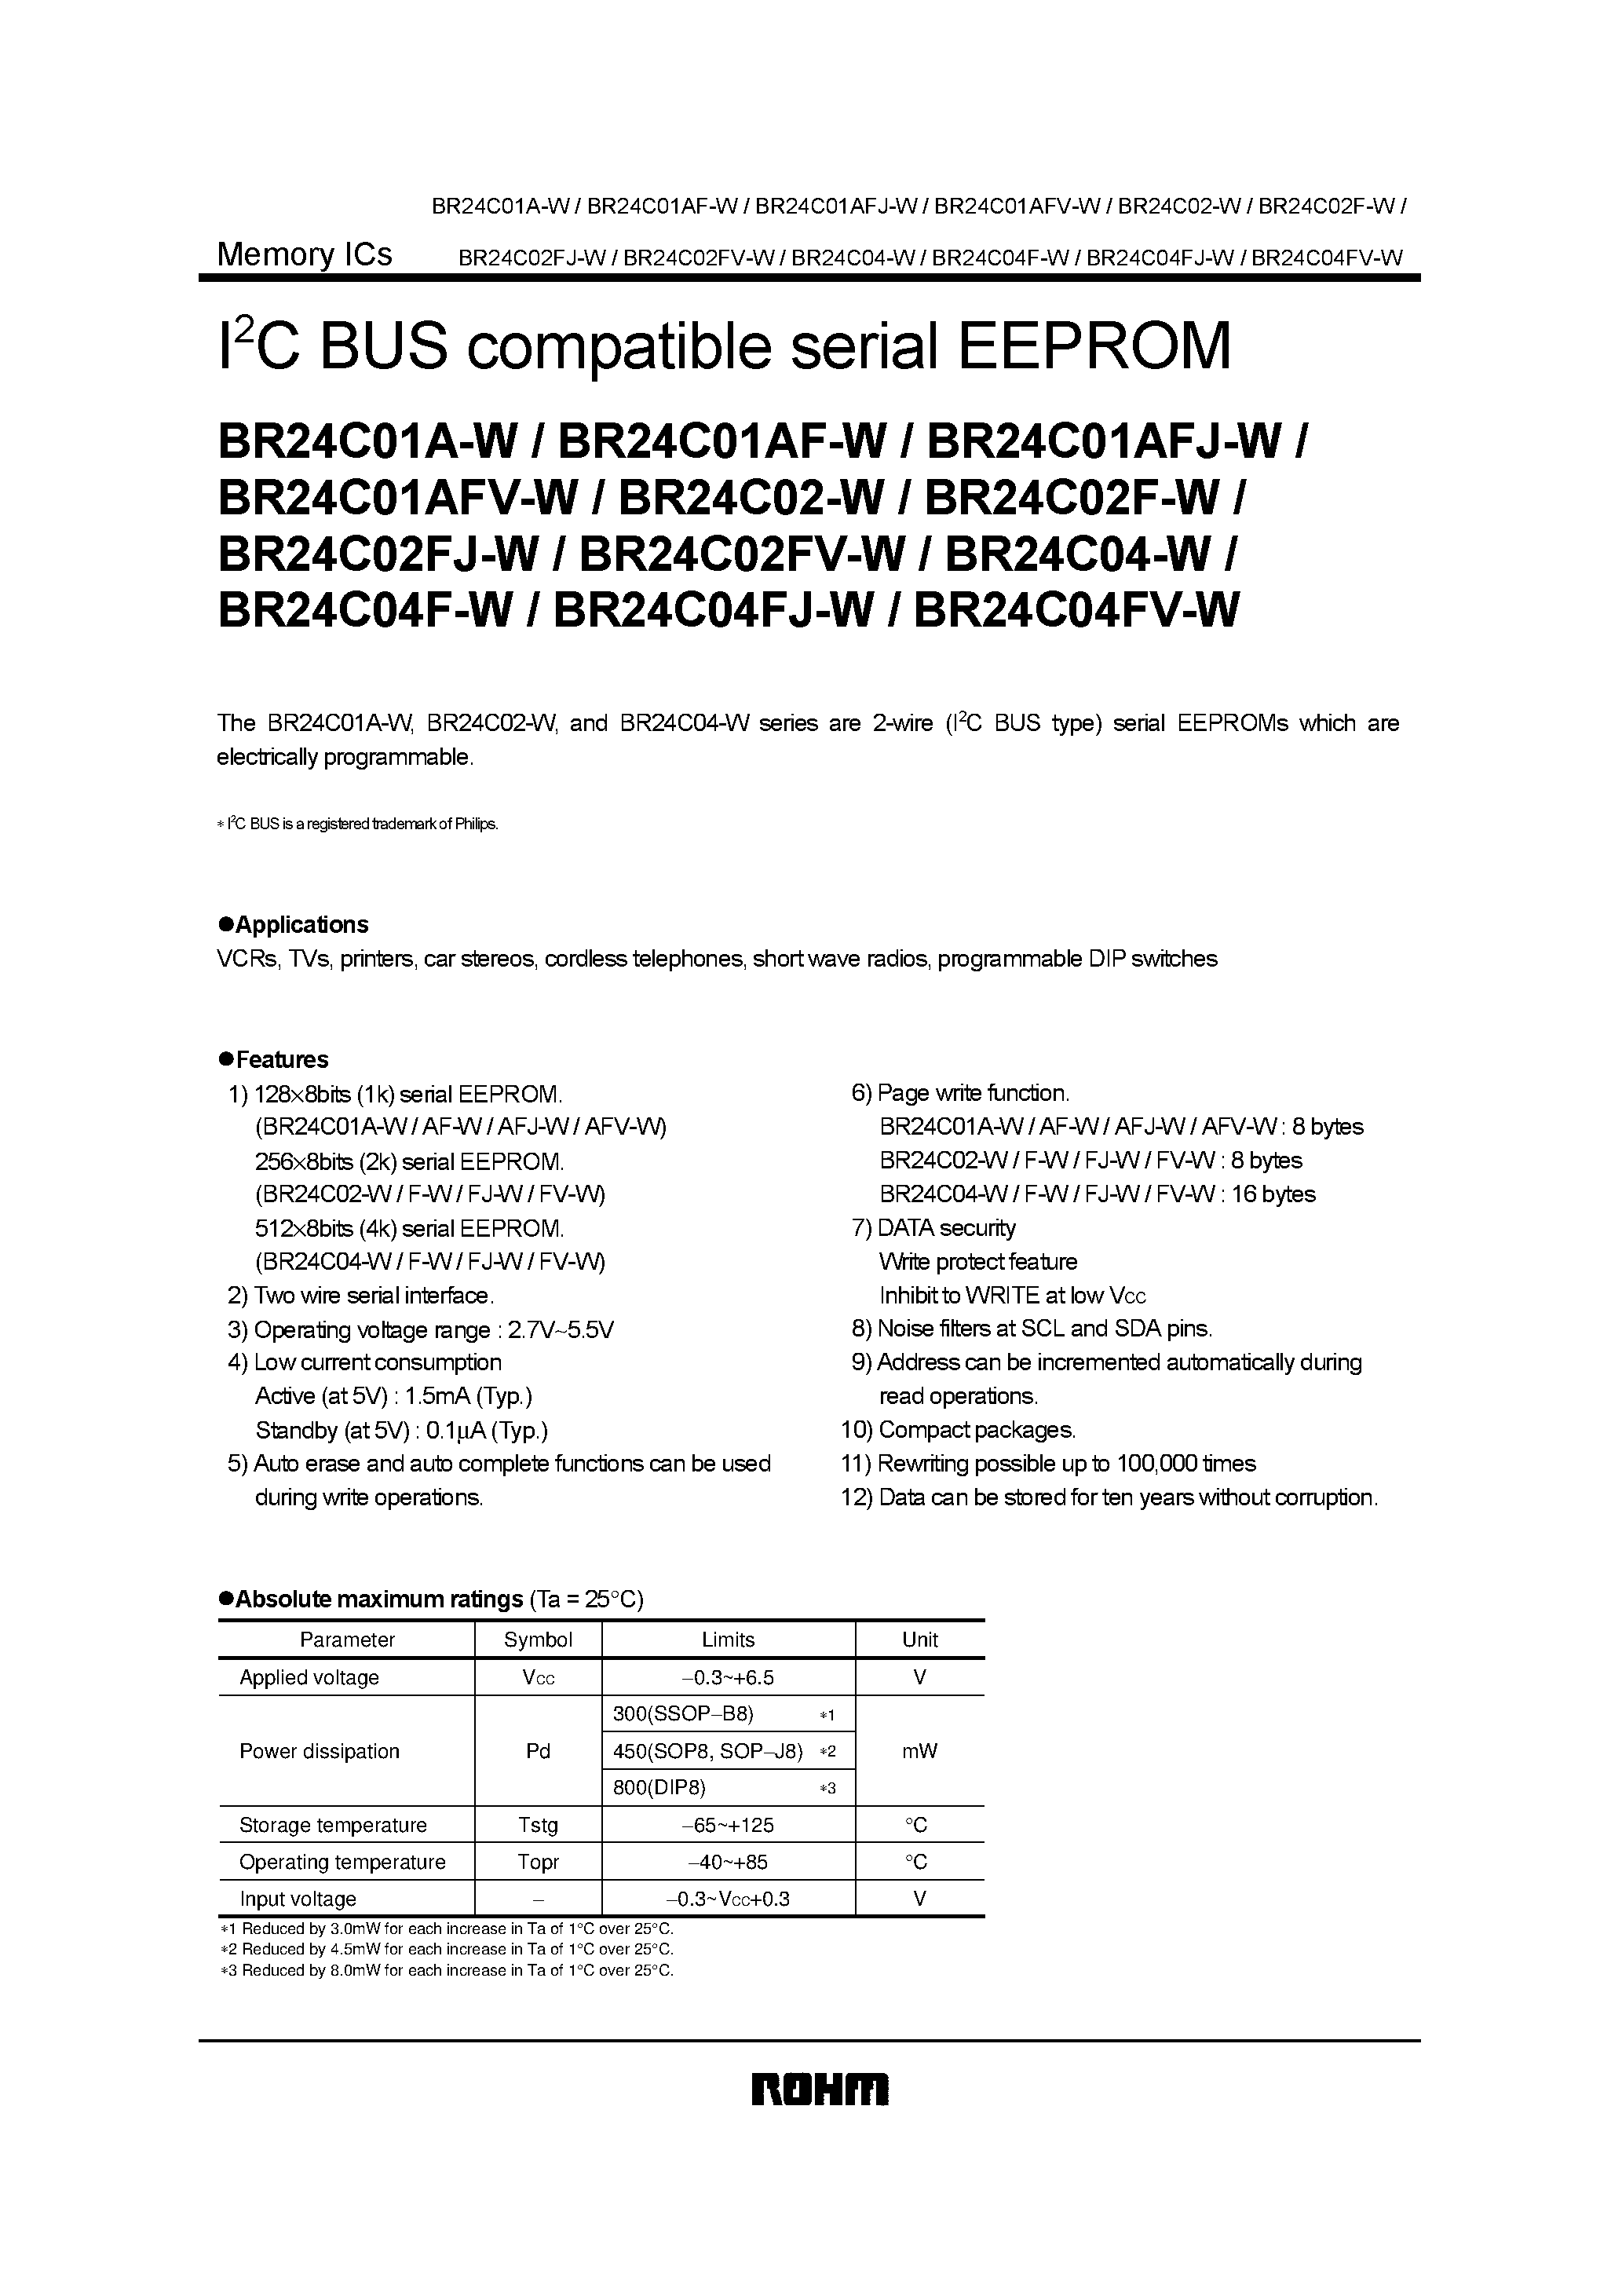 Datasheet BR24C01A-W - I2C BUS compatible serial EEPROM page 1